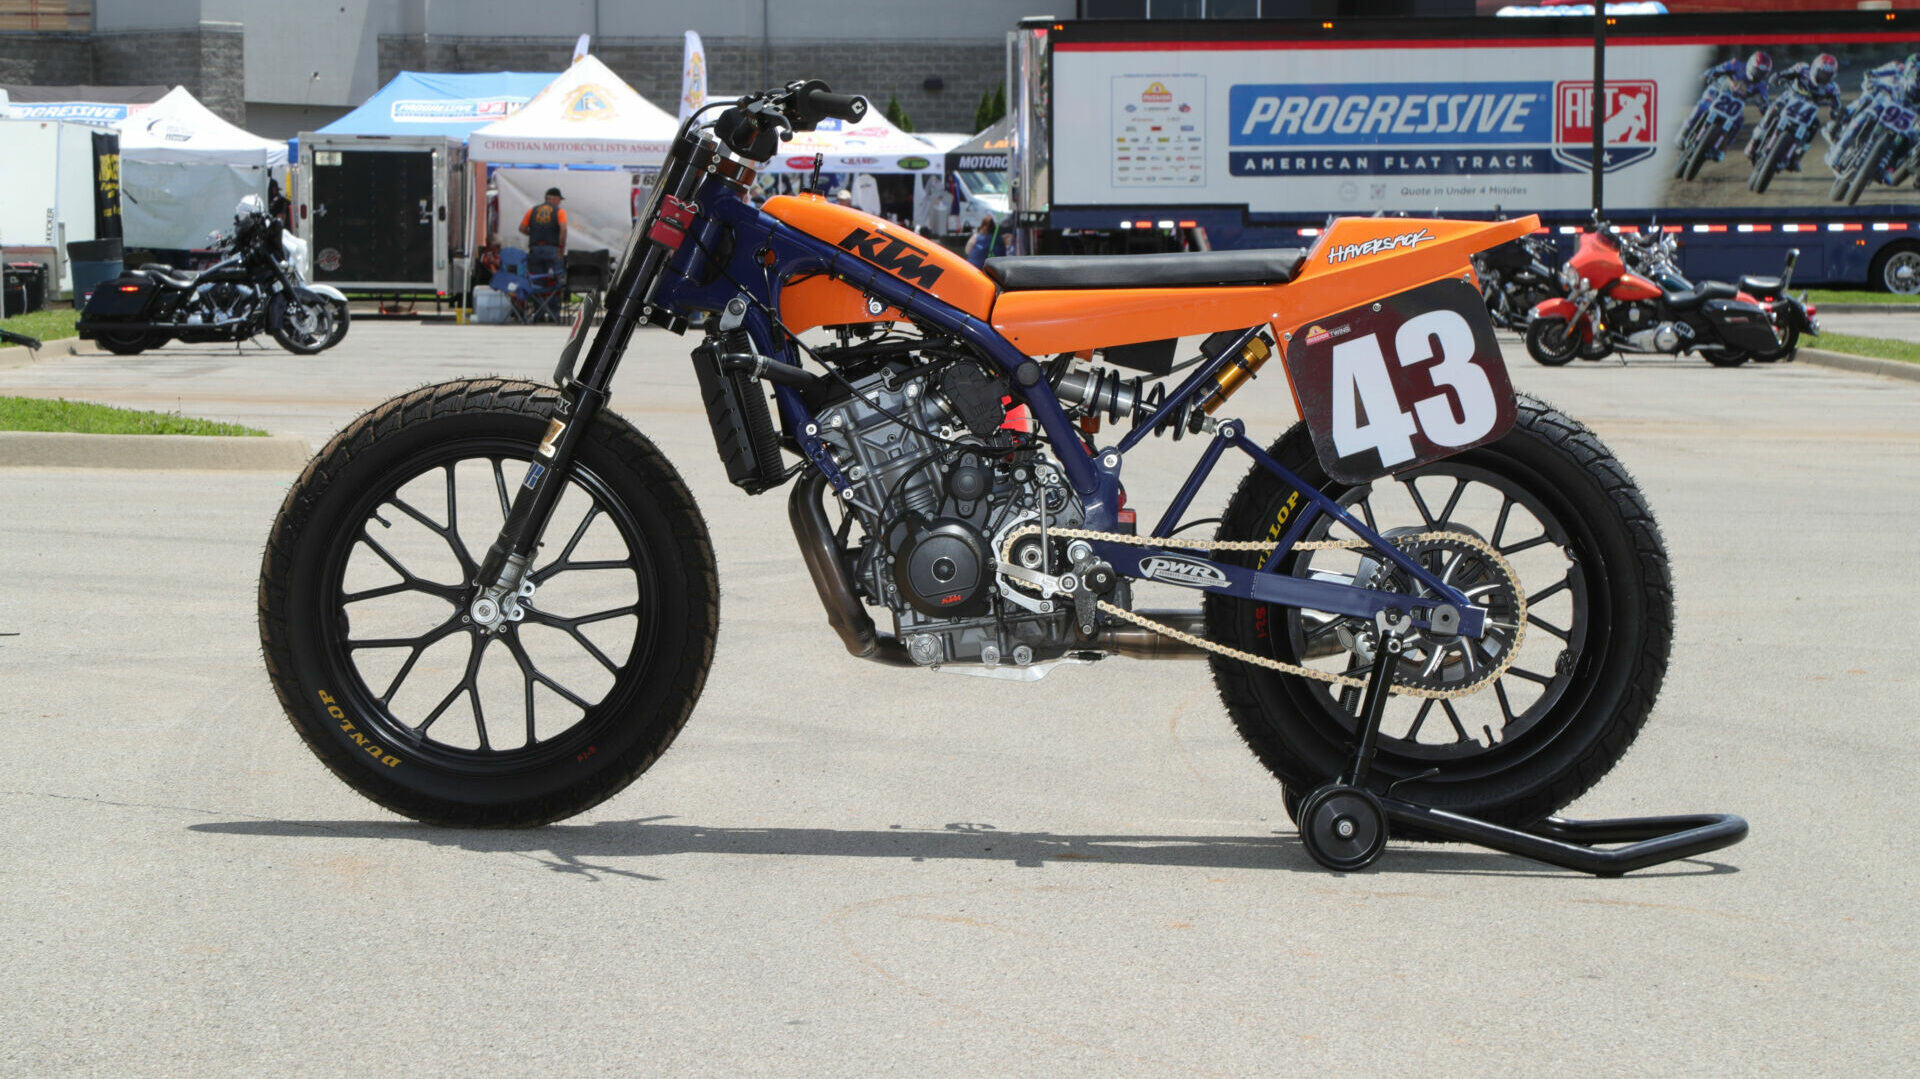 The KTM-powered Wally Brown Racing flat track racebike. Photo courtesy AFT.